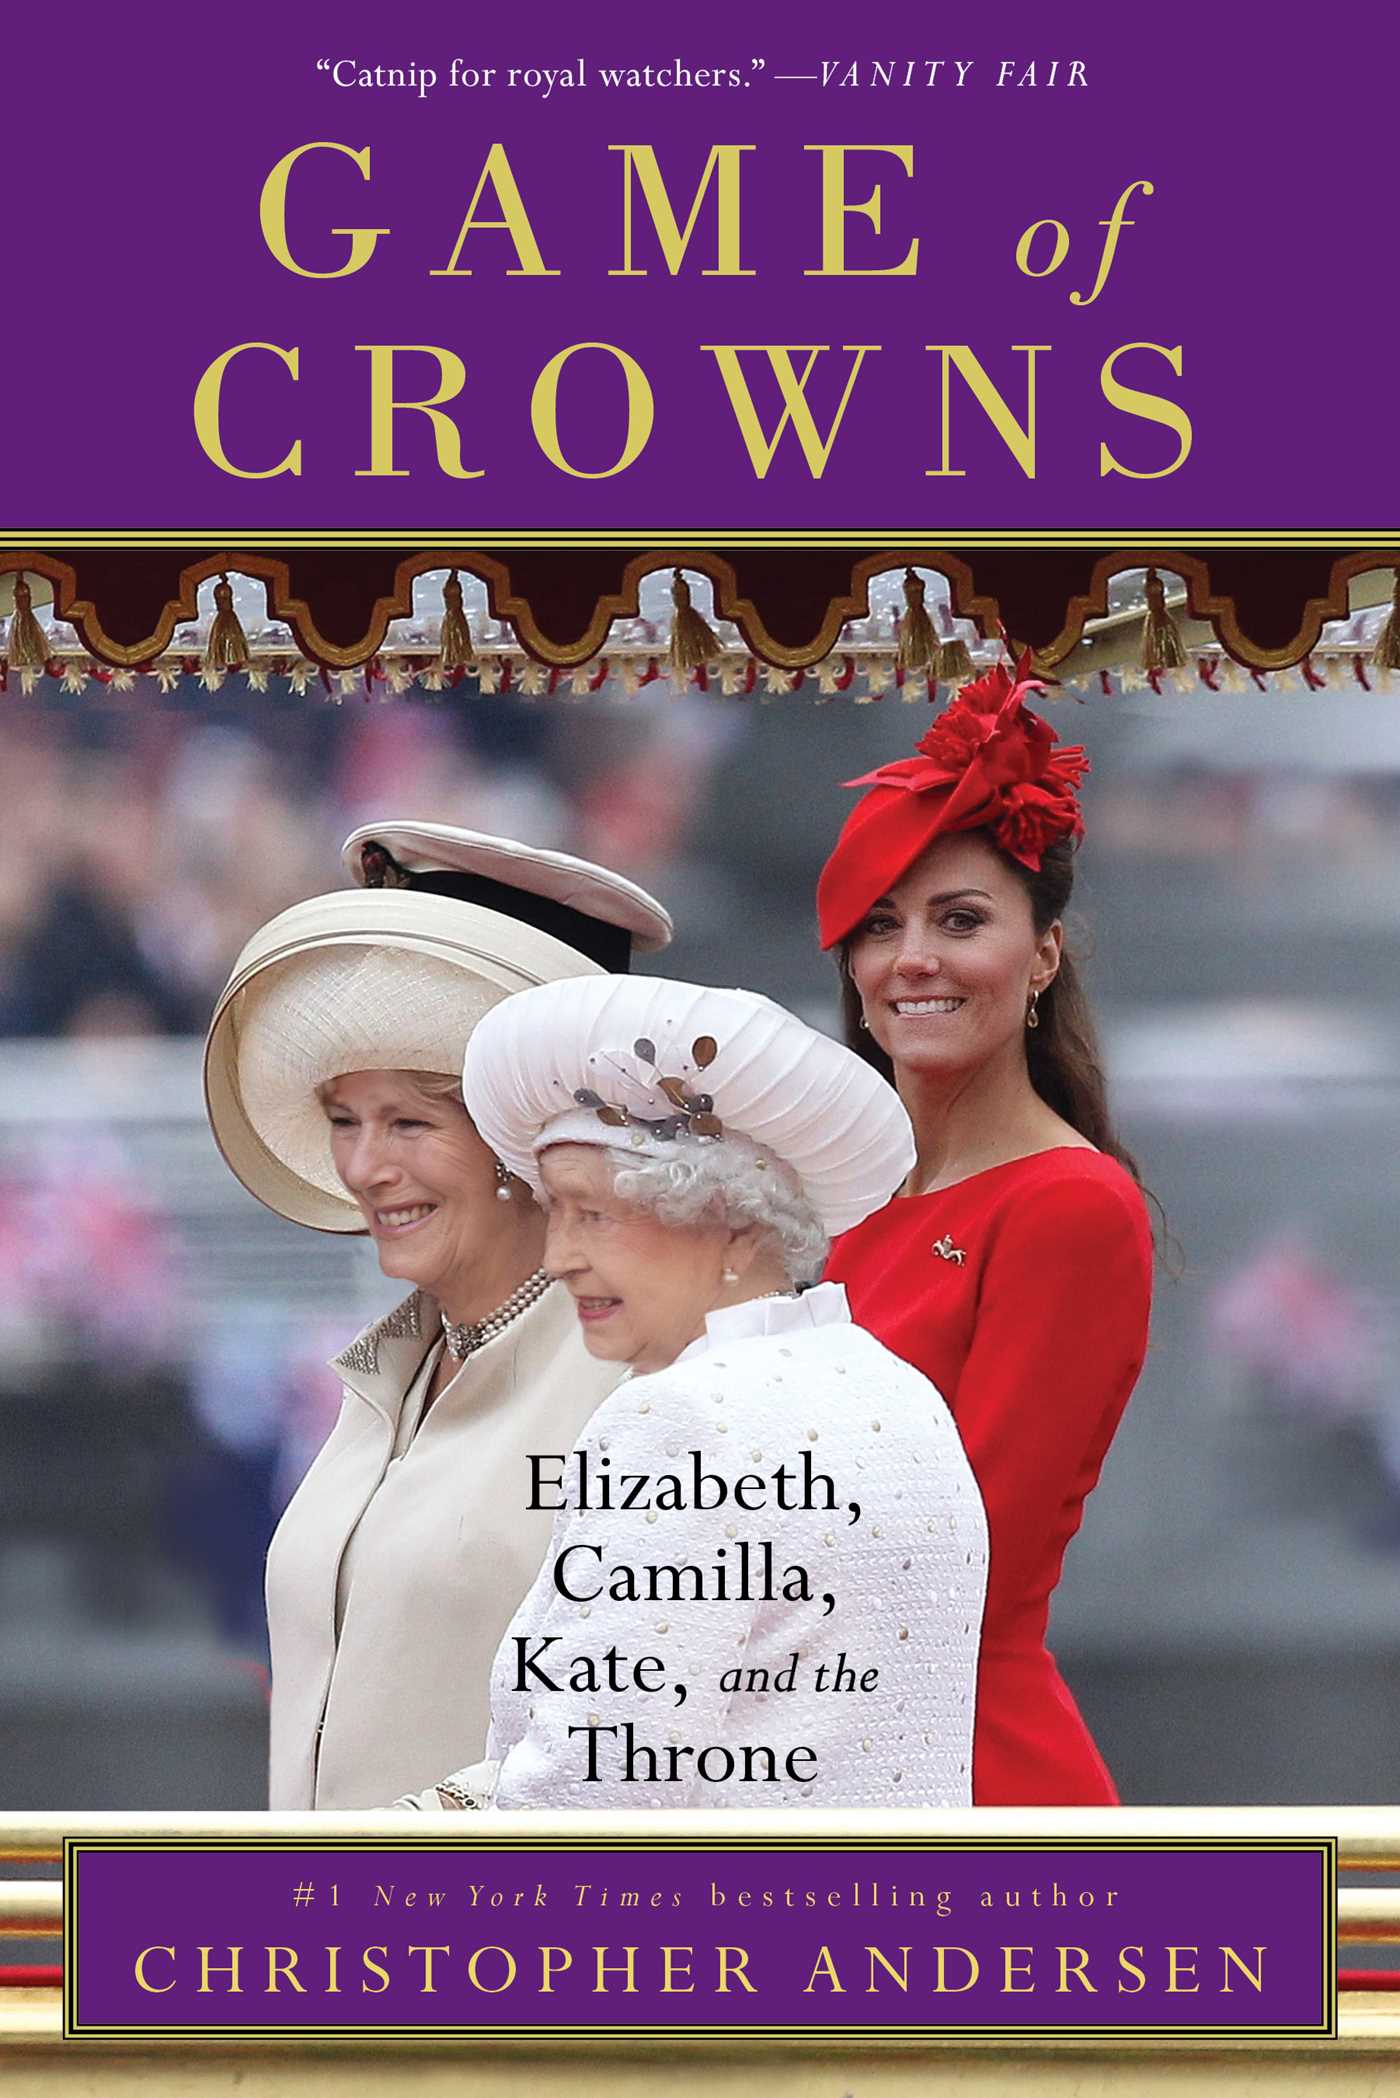 Game of crowns Elizabeth, Camilla, Kate, and the throne cover image